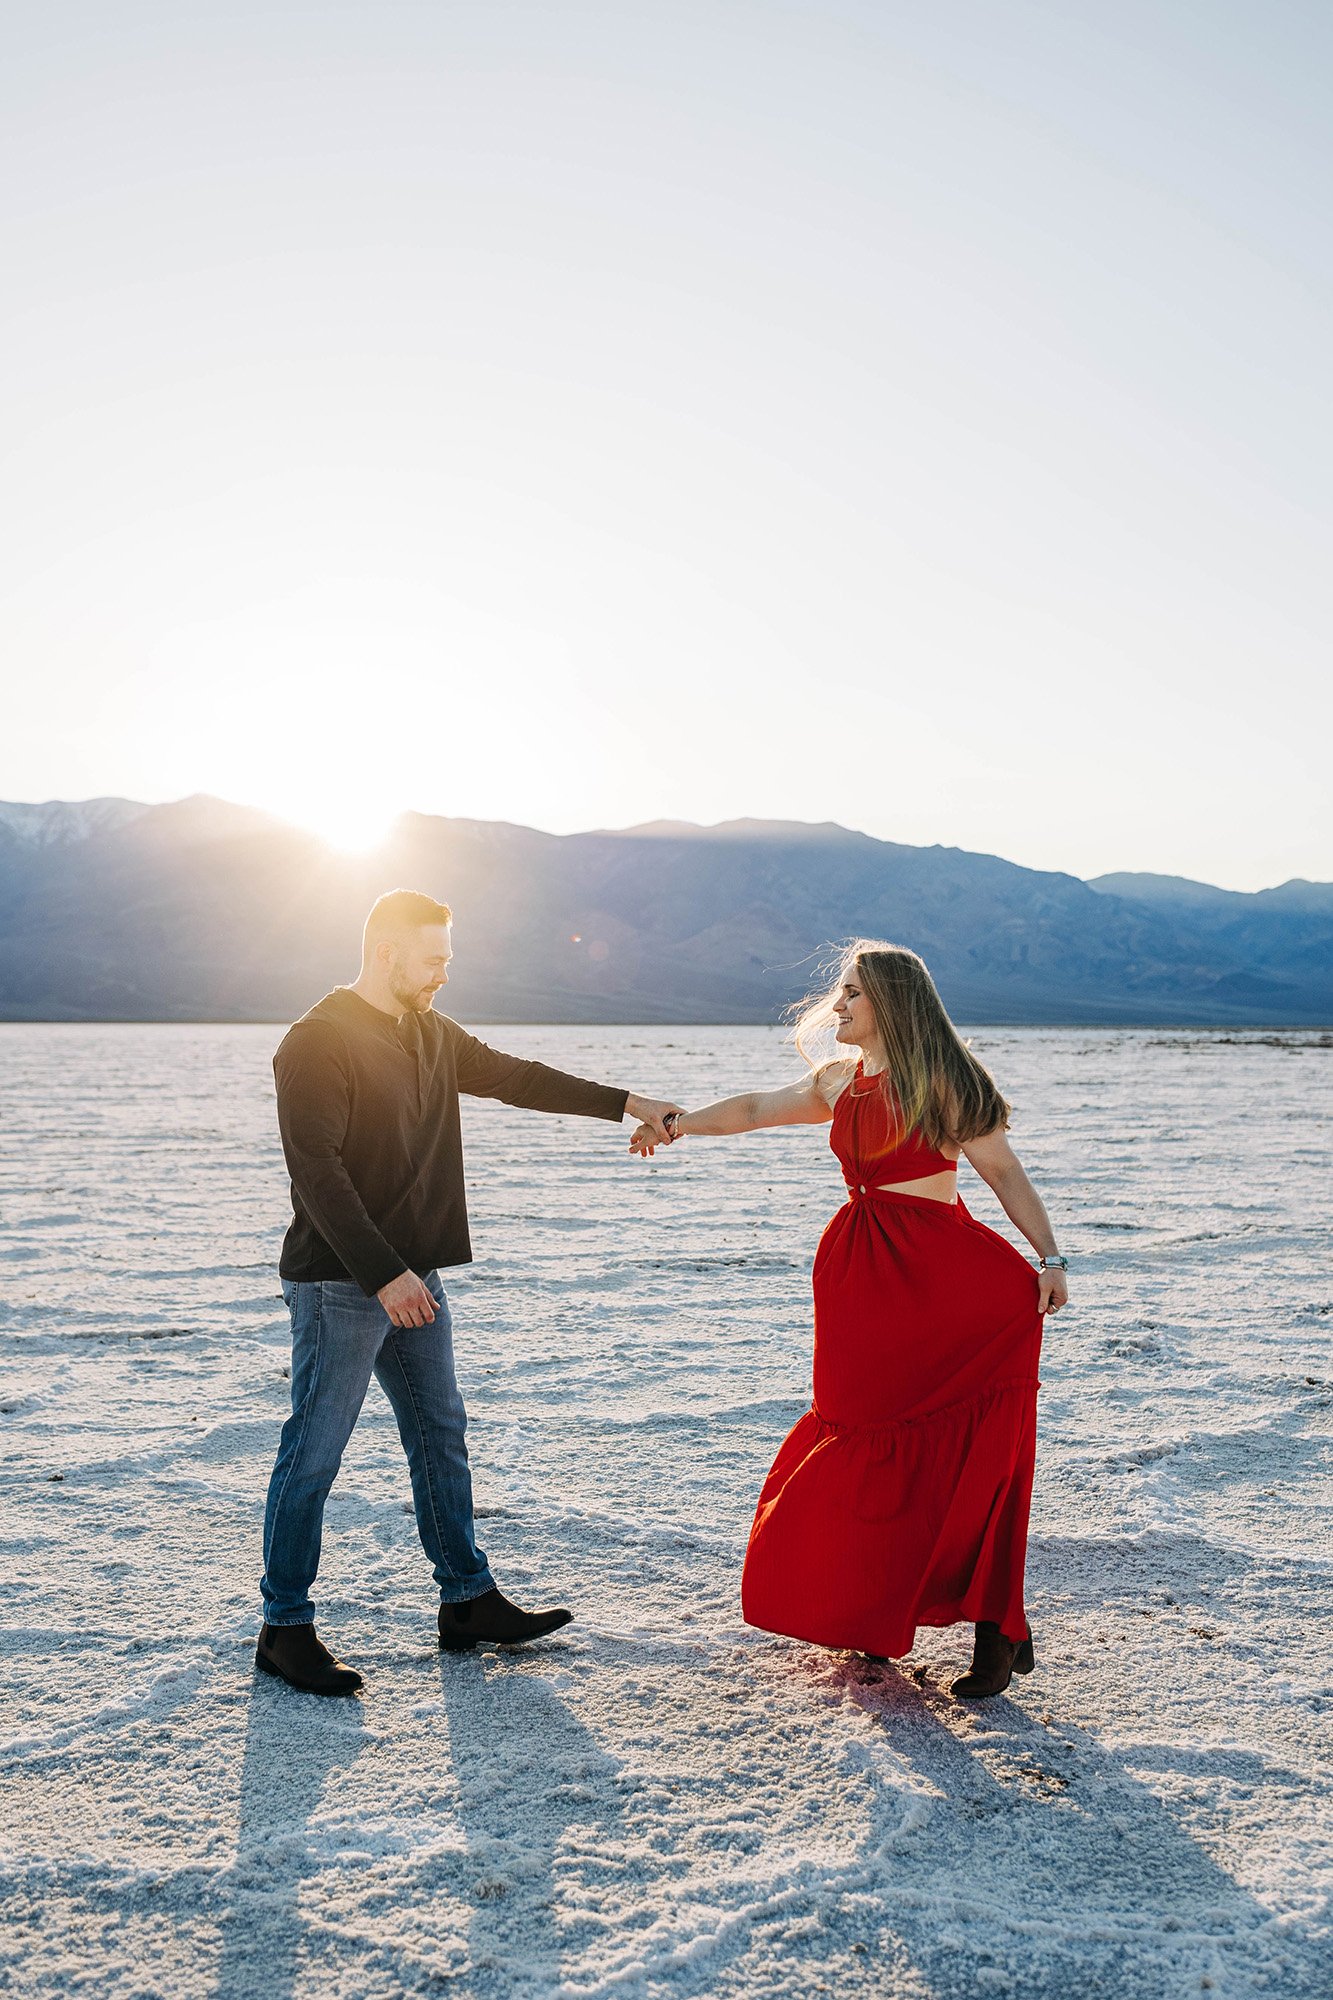 Alex and Aly dance on the salt flats of Death Valley National Park.